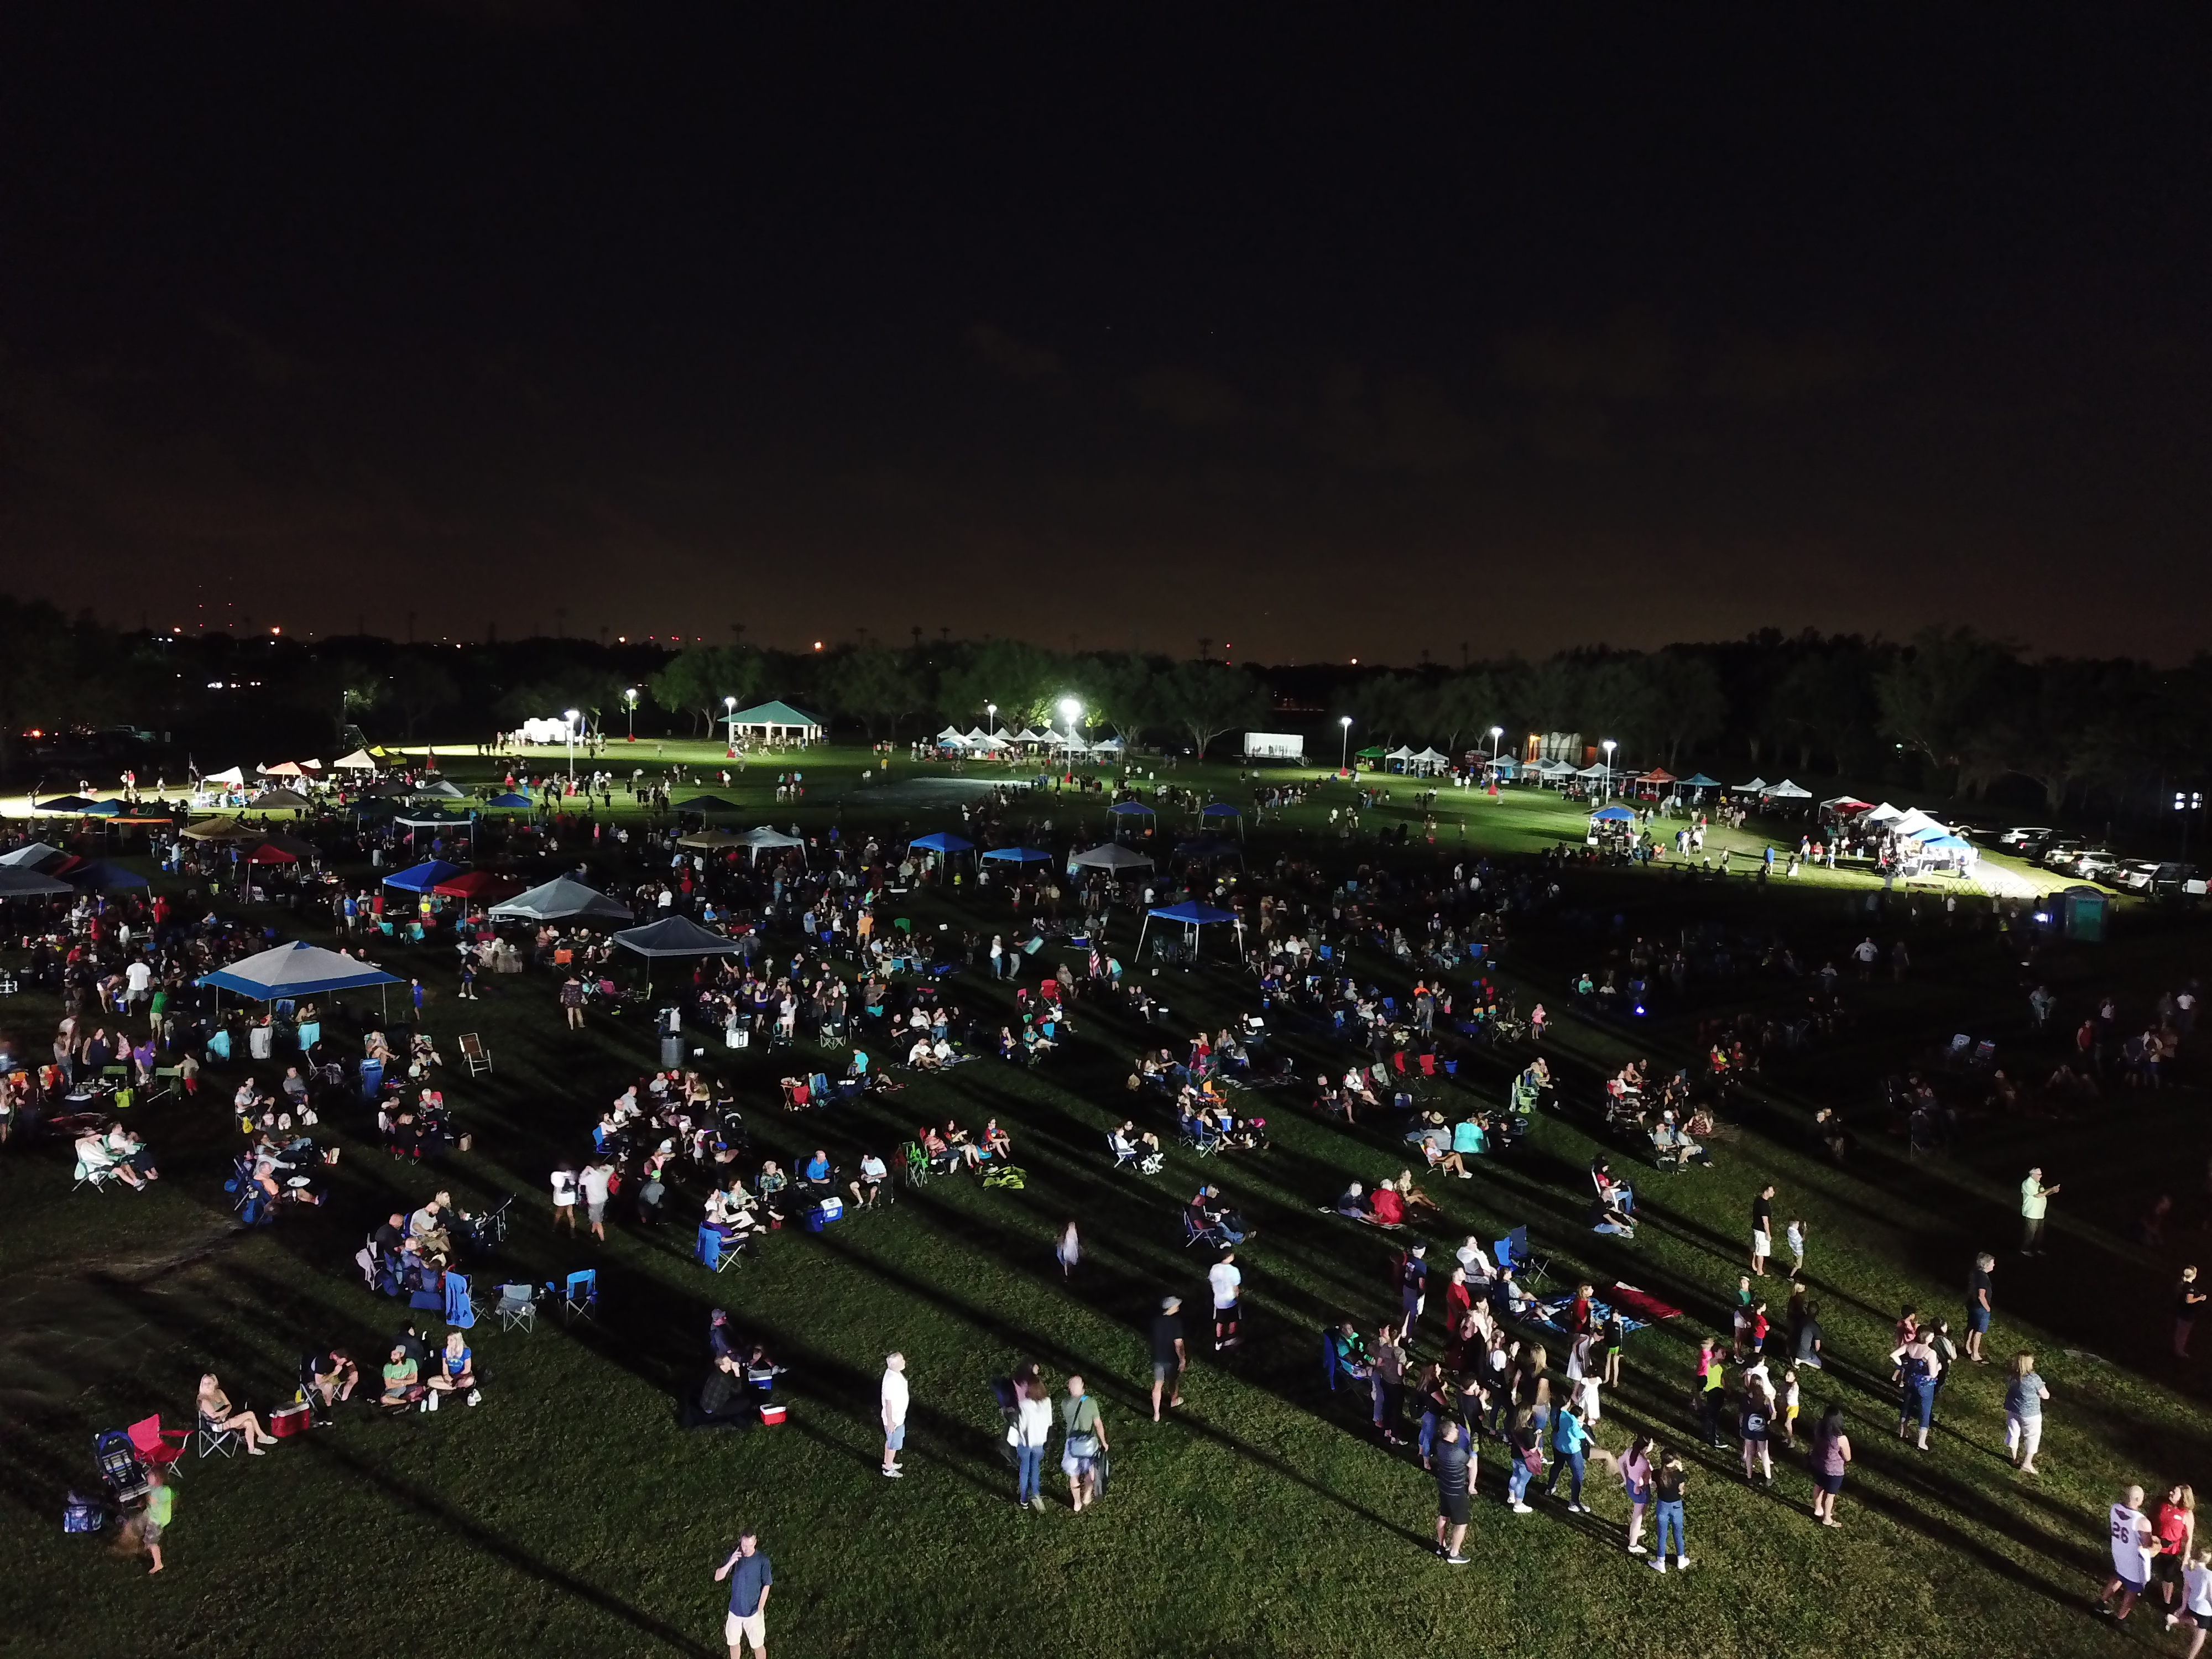 Crowd camped out at night to listen to music on grass field